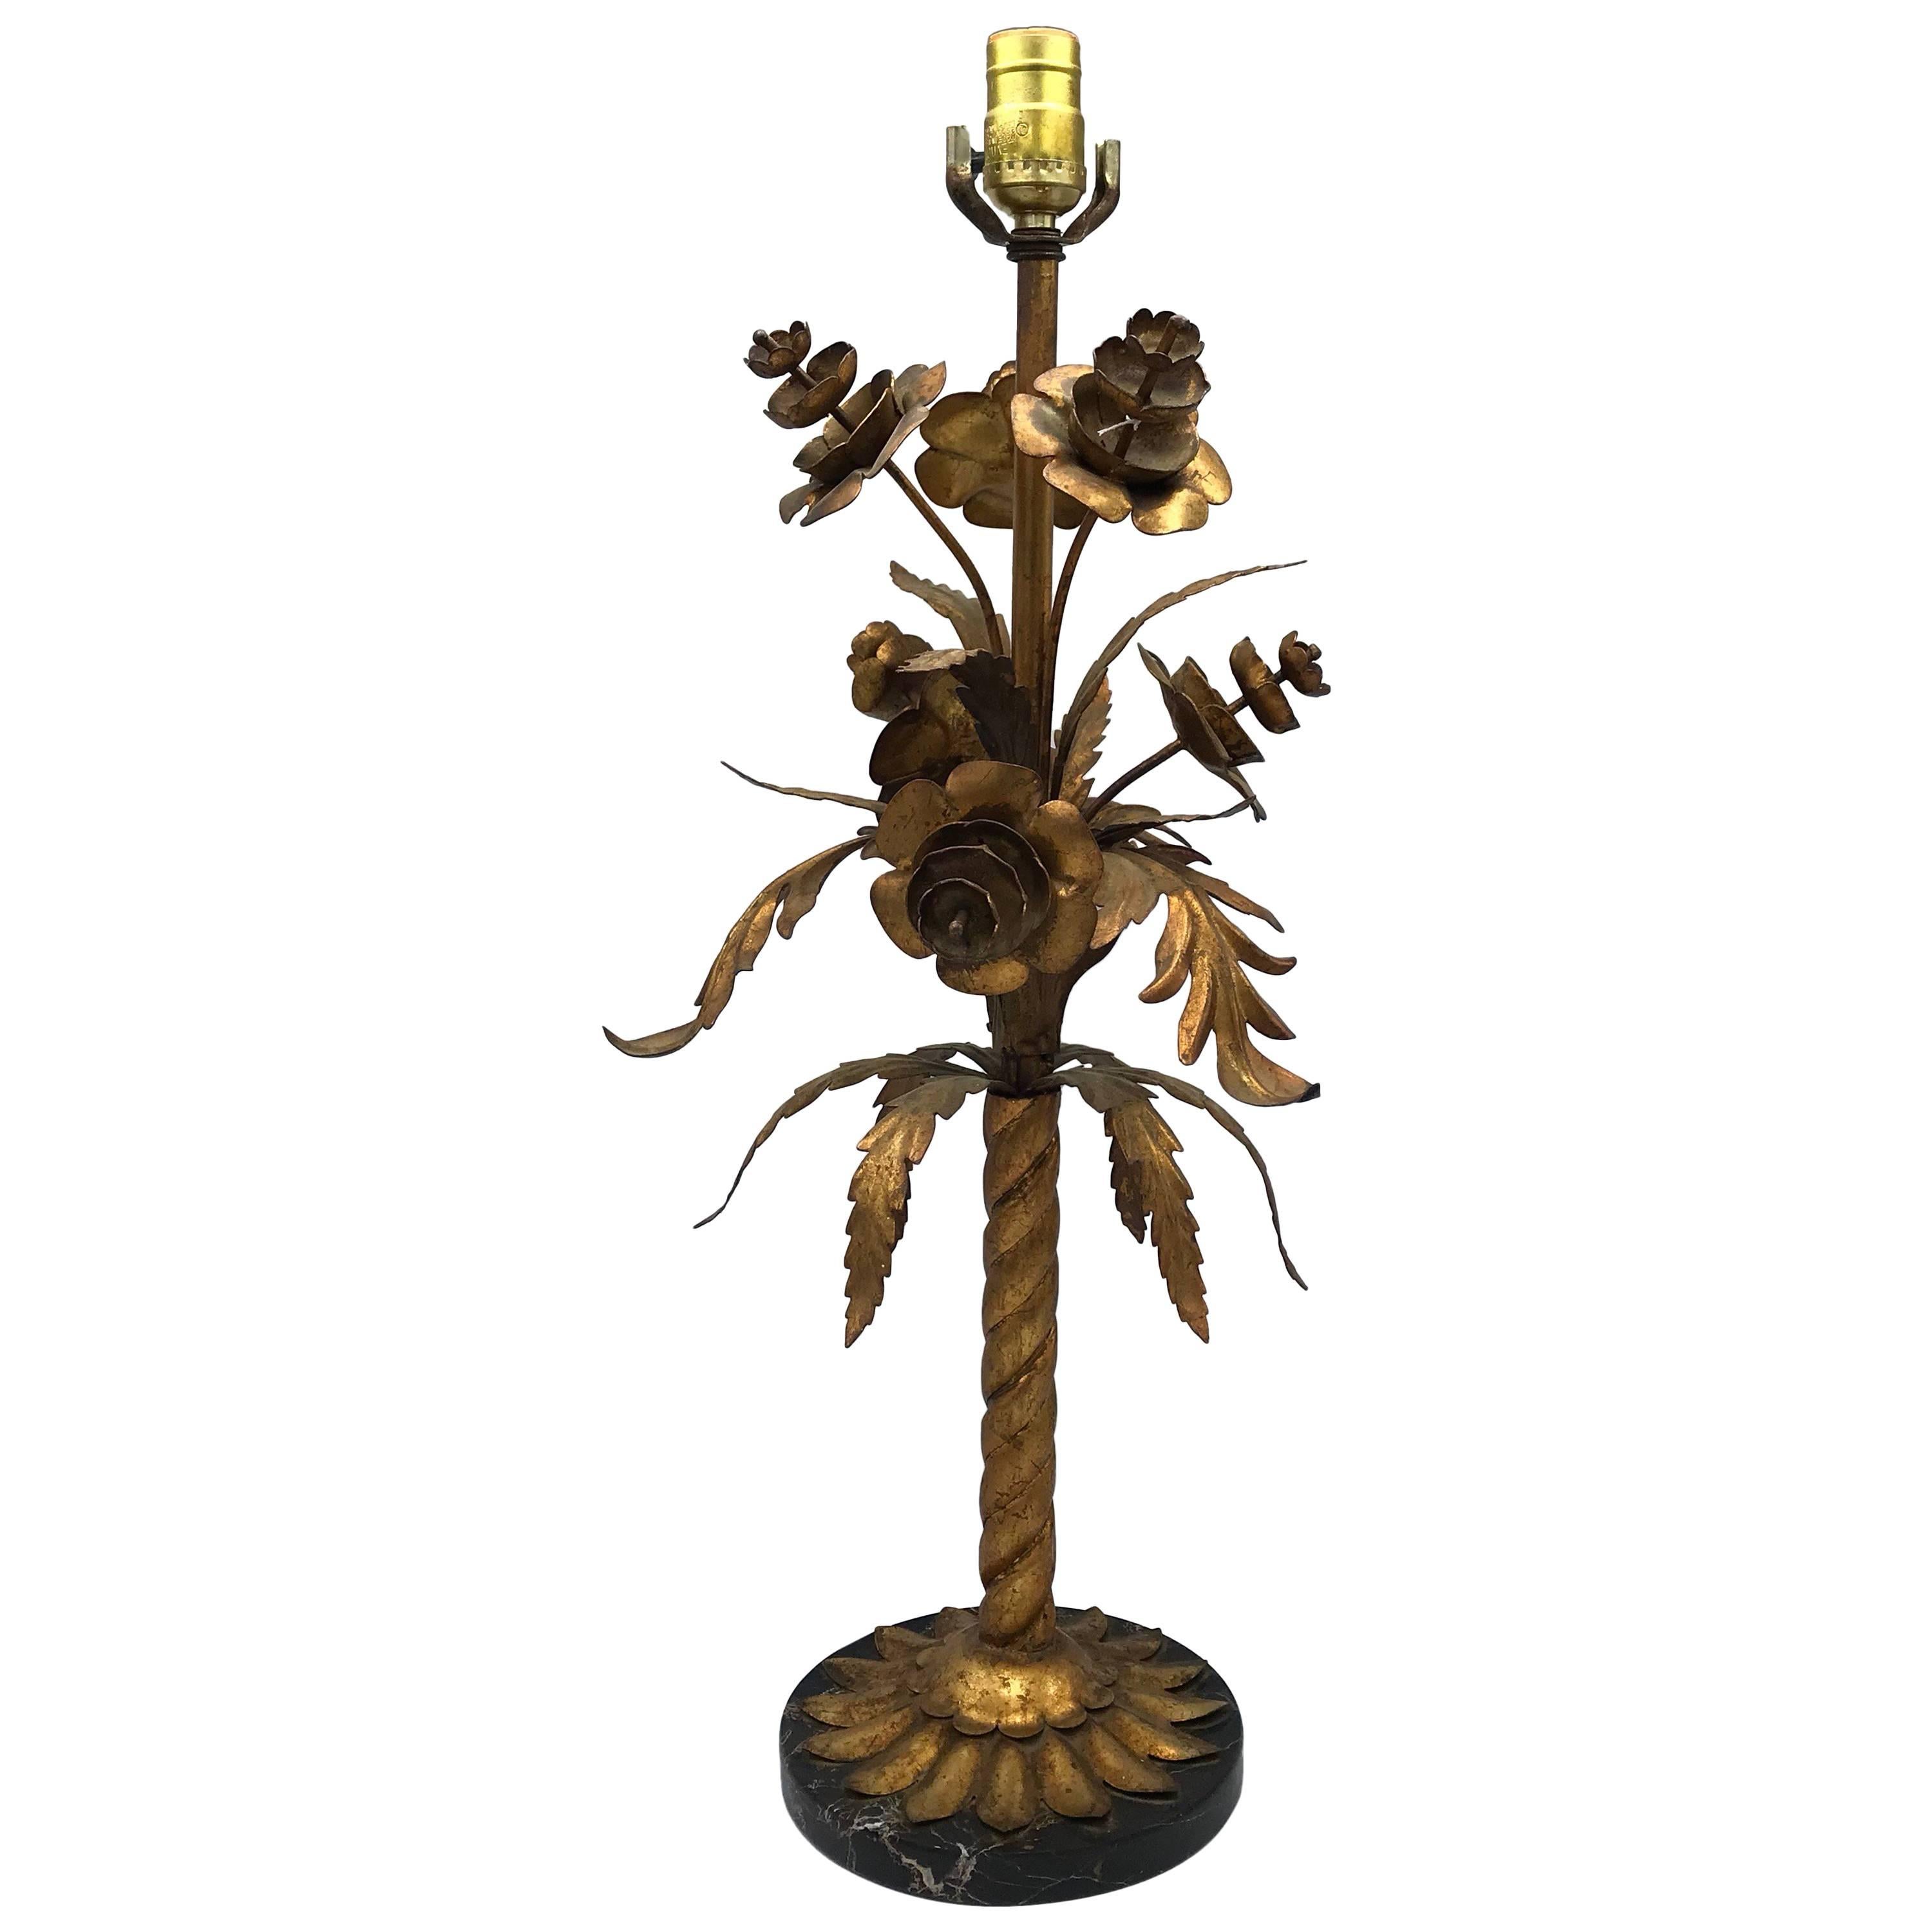 1960s Italian Florentine Gilded Lamp with Sculptural Floral Motif